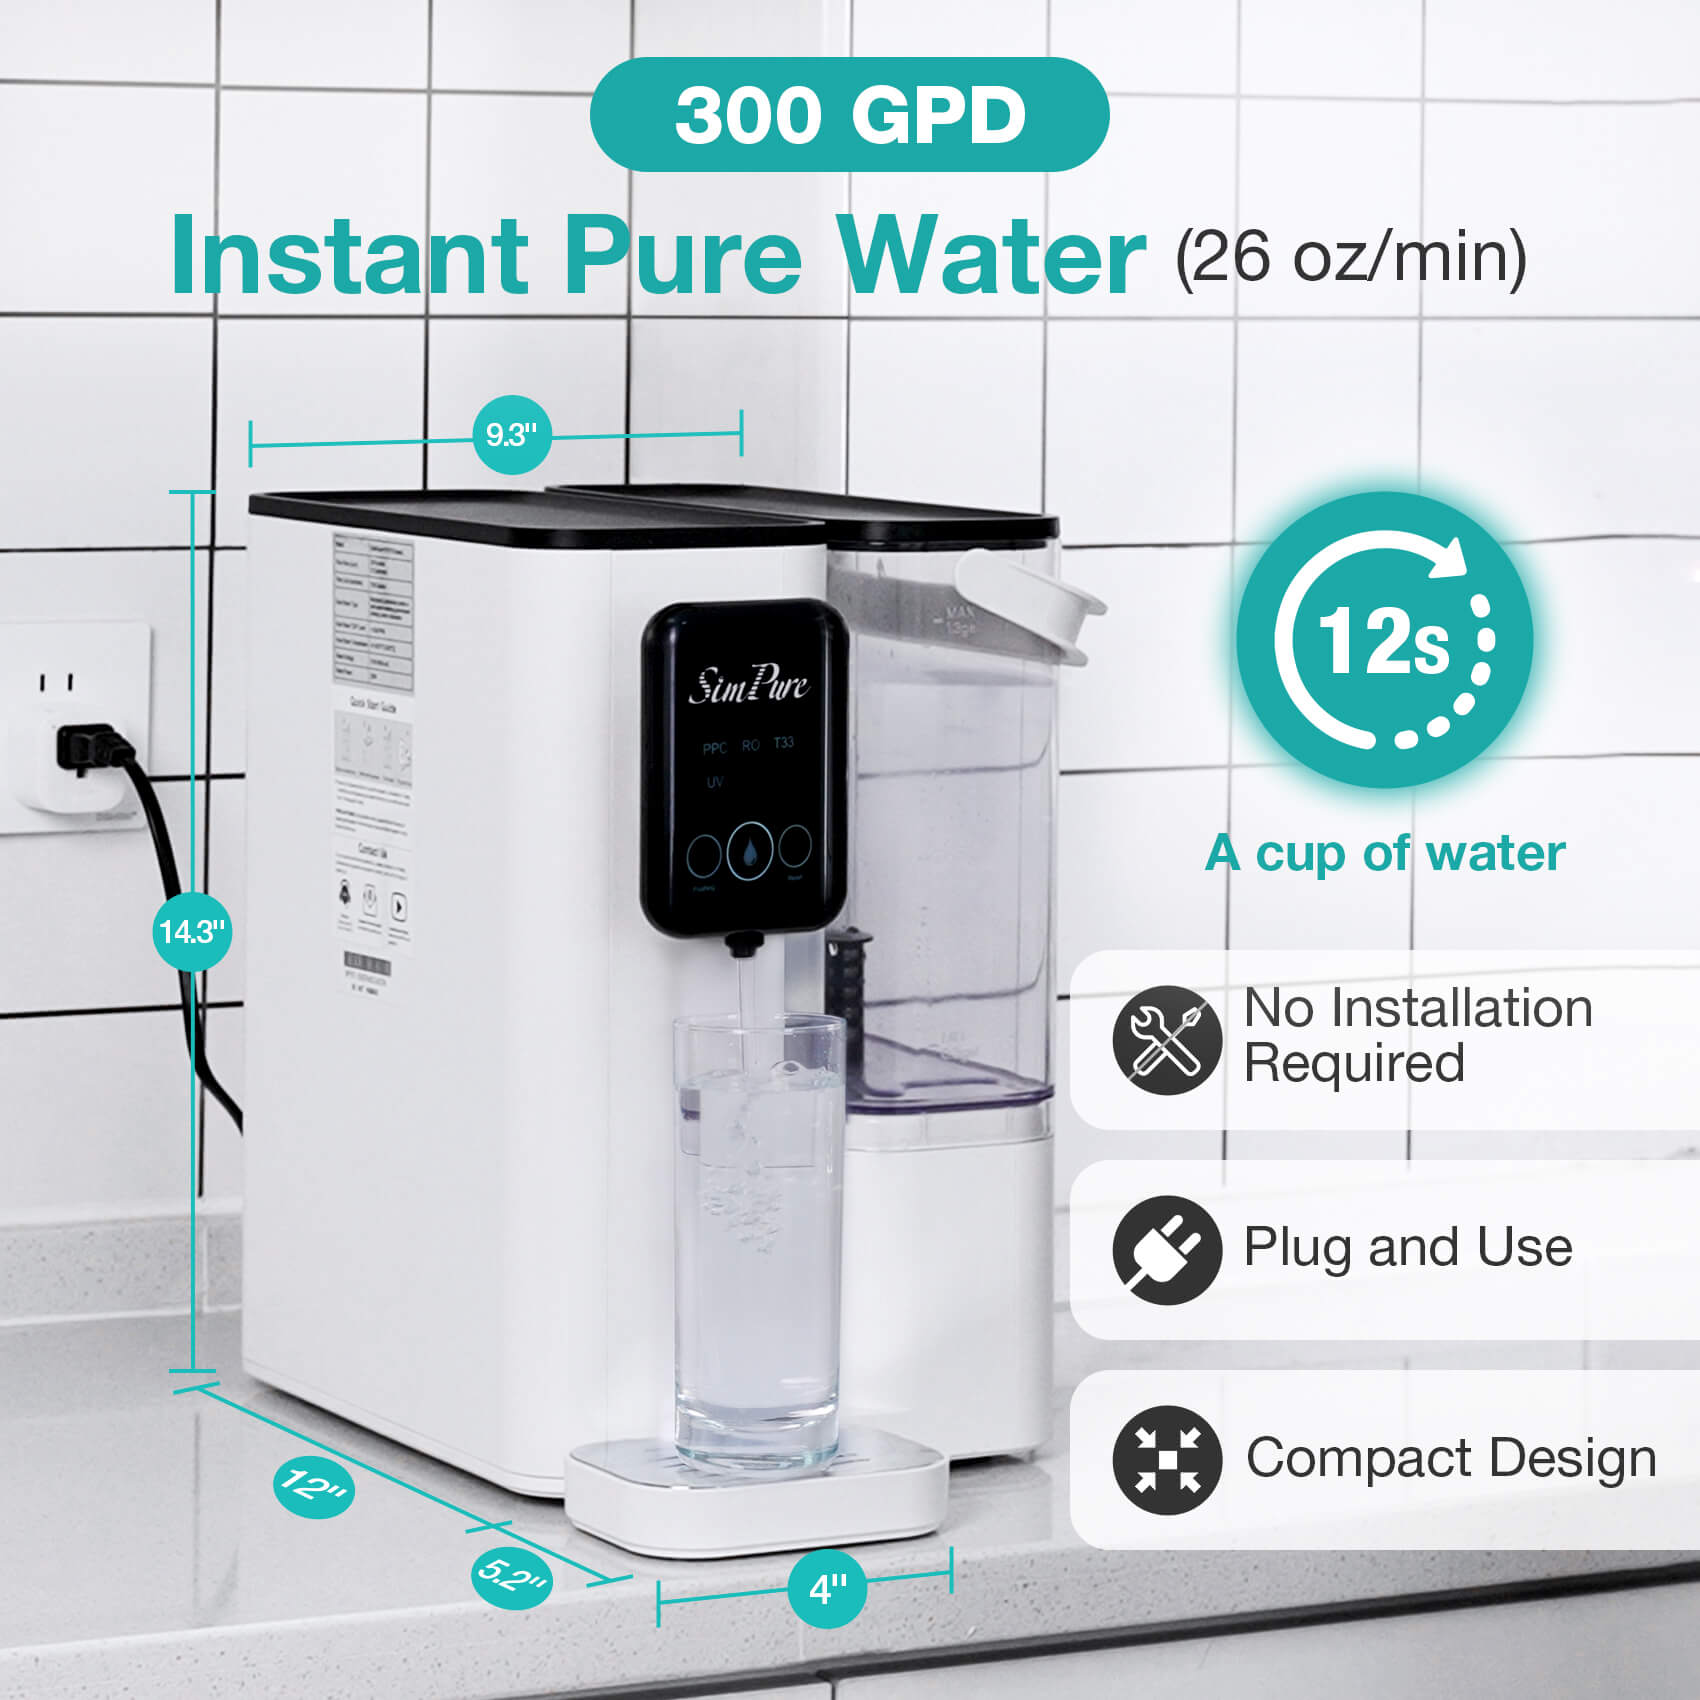 SimPure Y9T 6-Stages UV 300GPD Portable Countertop Reverse Osmosis Water Filtration System | RO+UV+T33 Filtration